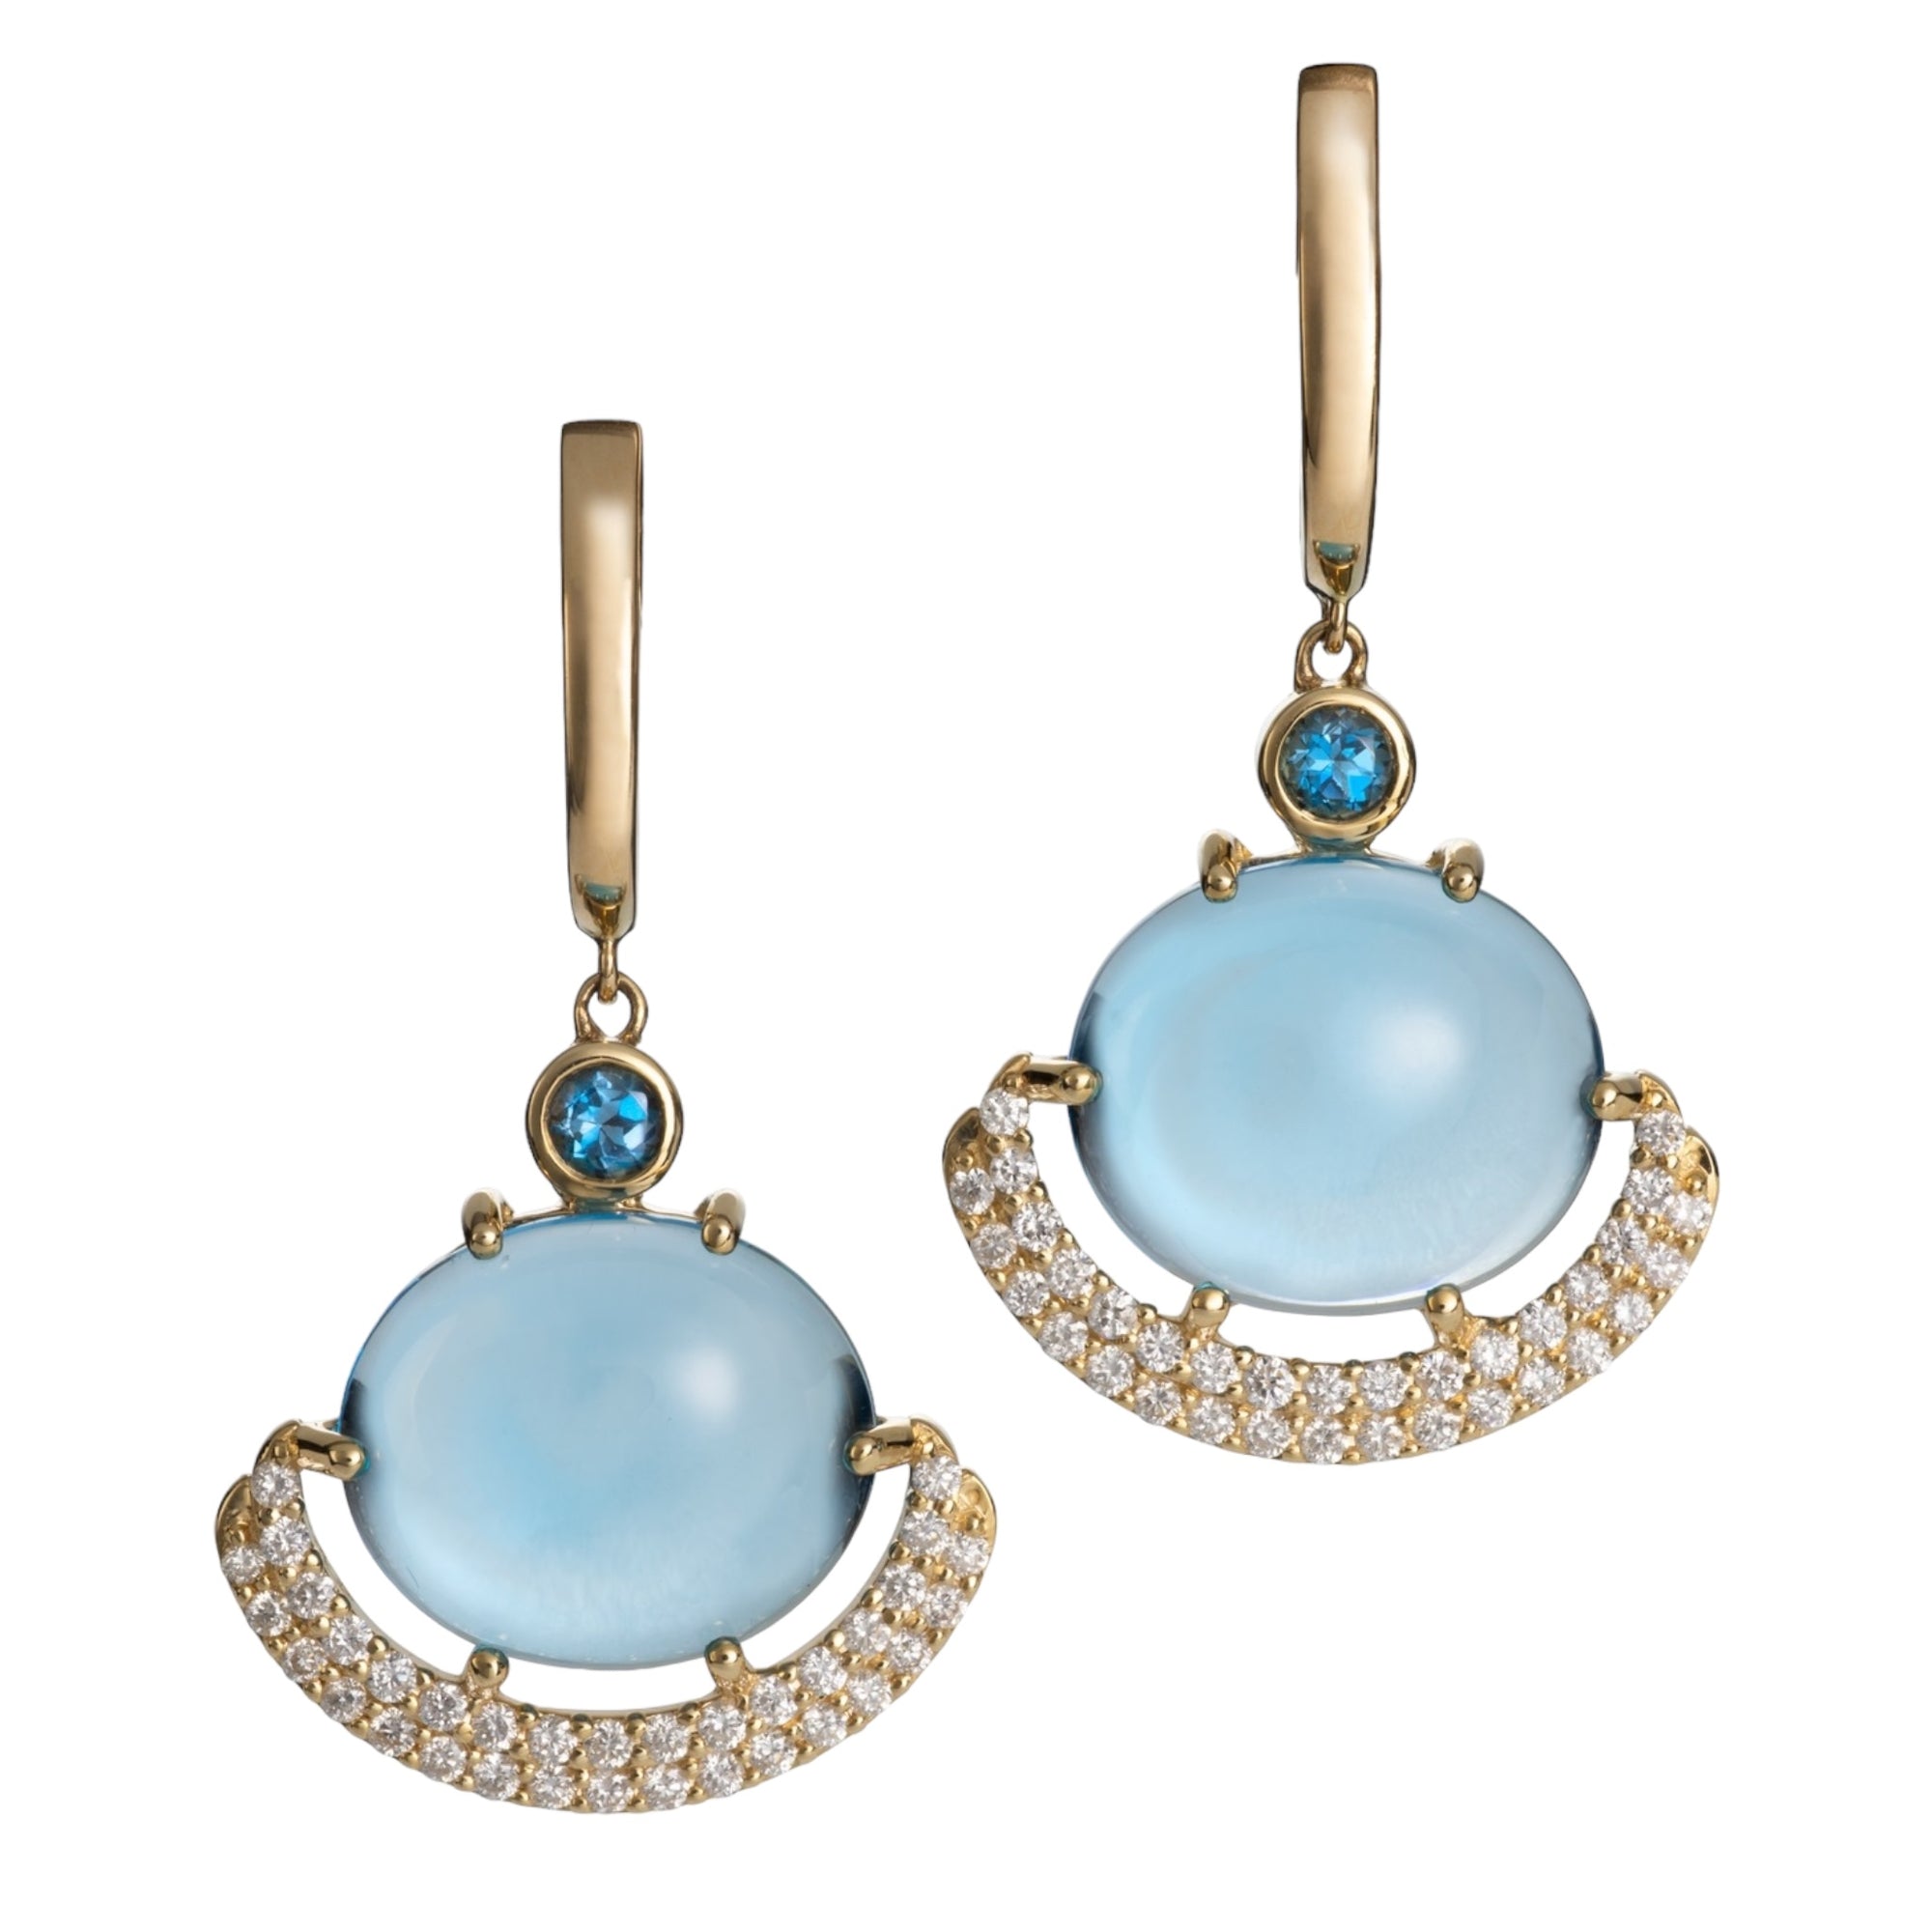 Eclipse Earrings - Swiss Blue Topaz 14k by Martha Seely available at Talisman Collection Fine Jewelers in El Dorado Hills, CA and online.Stats: Embrace the energy of eclipses with these award-winning Eclipse Earrings. Featuring a vibrant cabochon Swiss blue topaz at the center (14 x 12mm), adorned with luxurious London blue topaz (3mm round) and 0.68 carats of dazzling diamonds, these earrings will add a touch of sparkle and joy to every day.